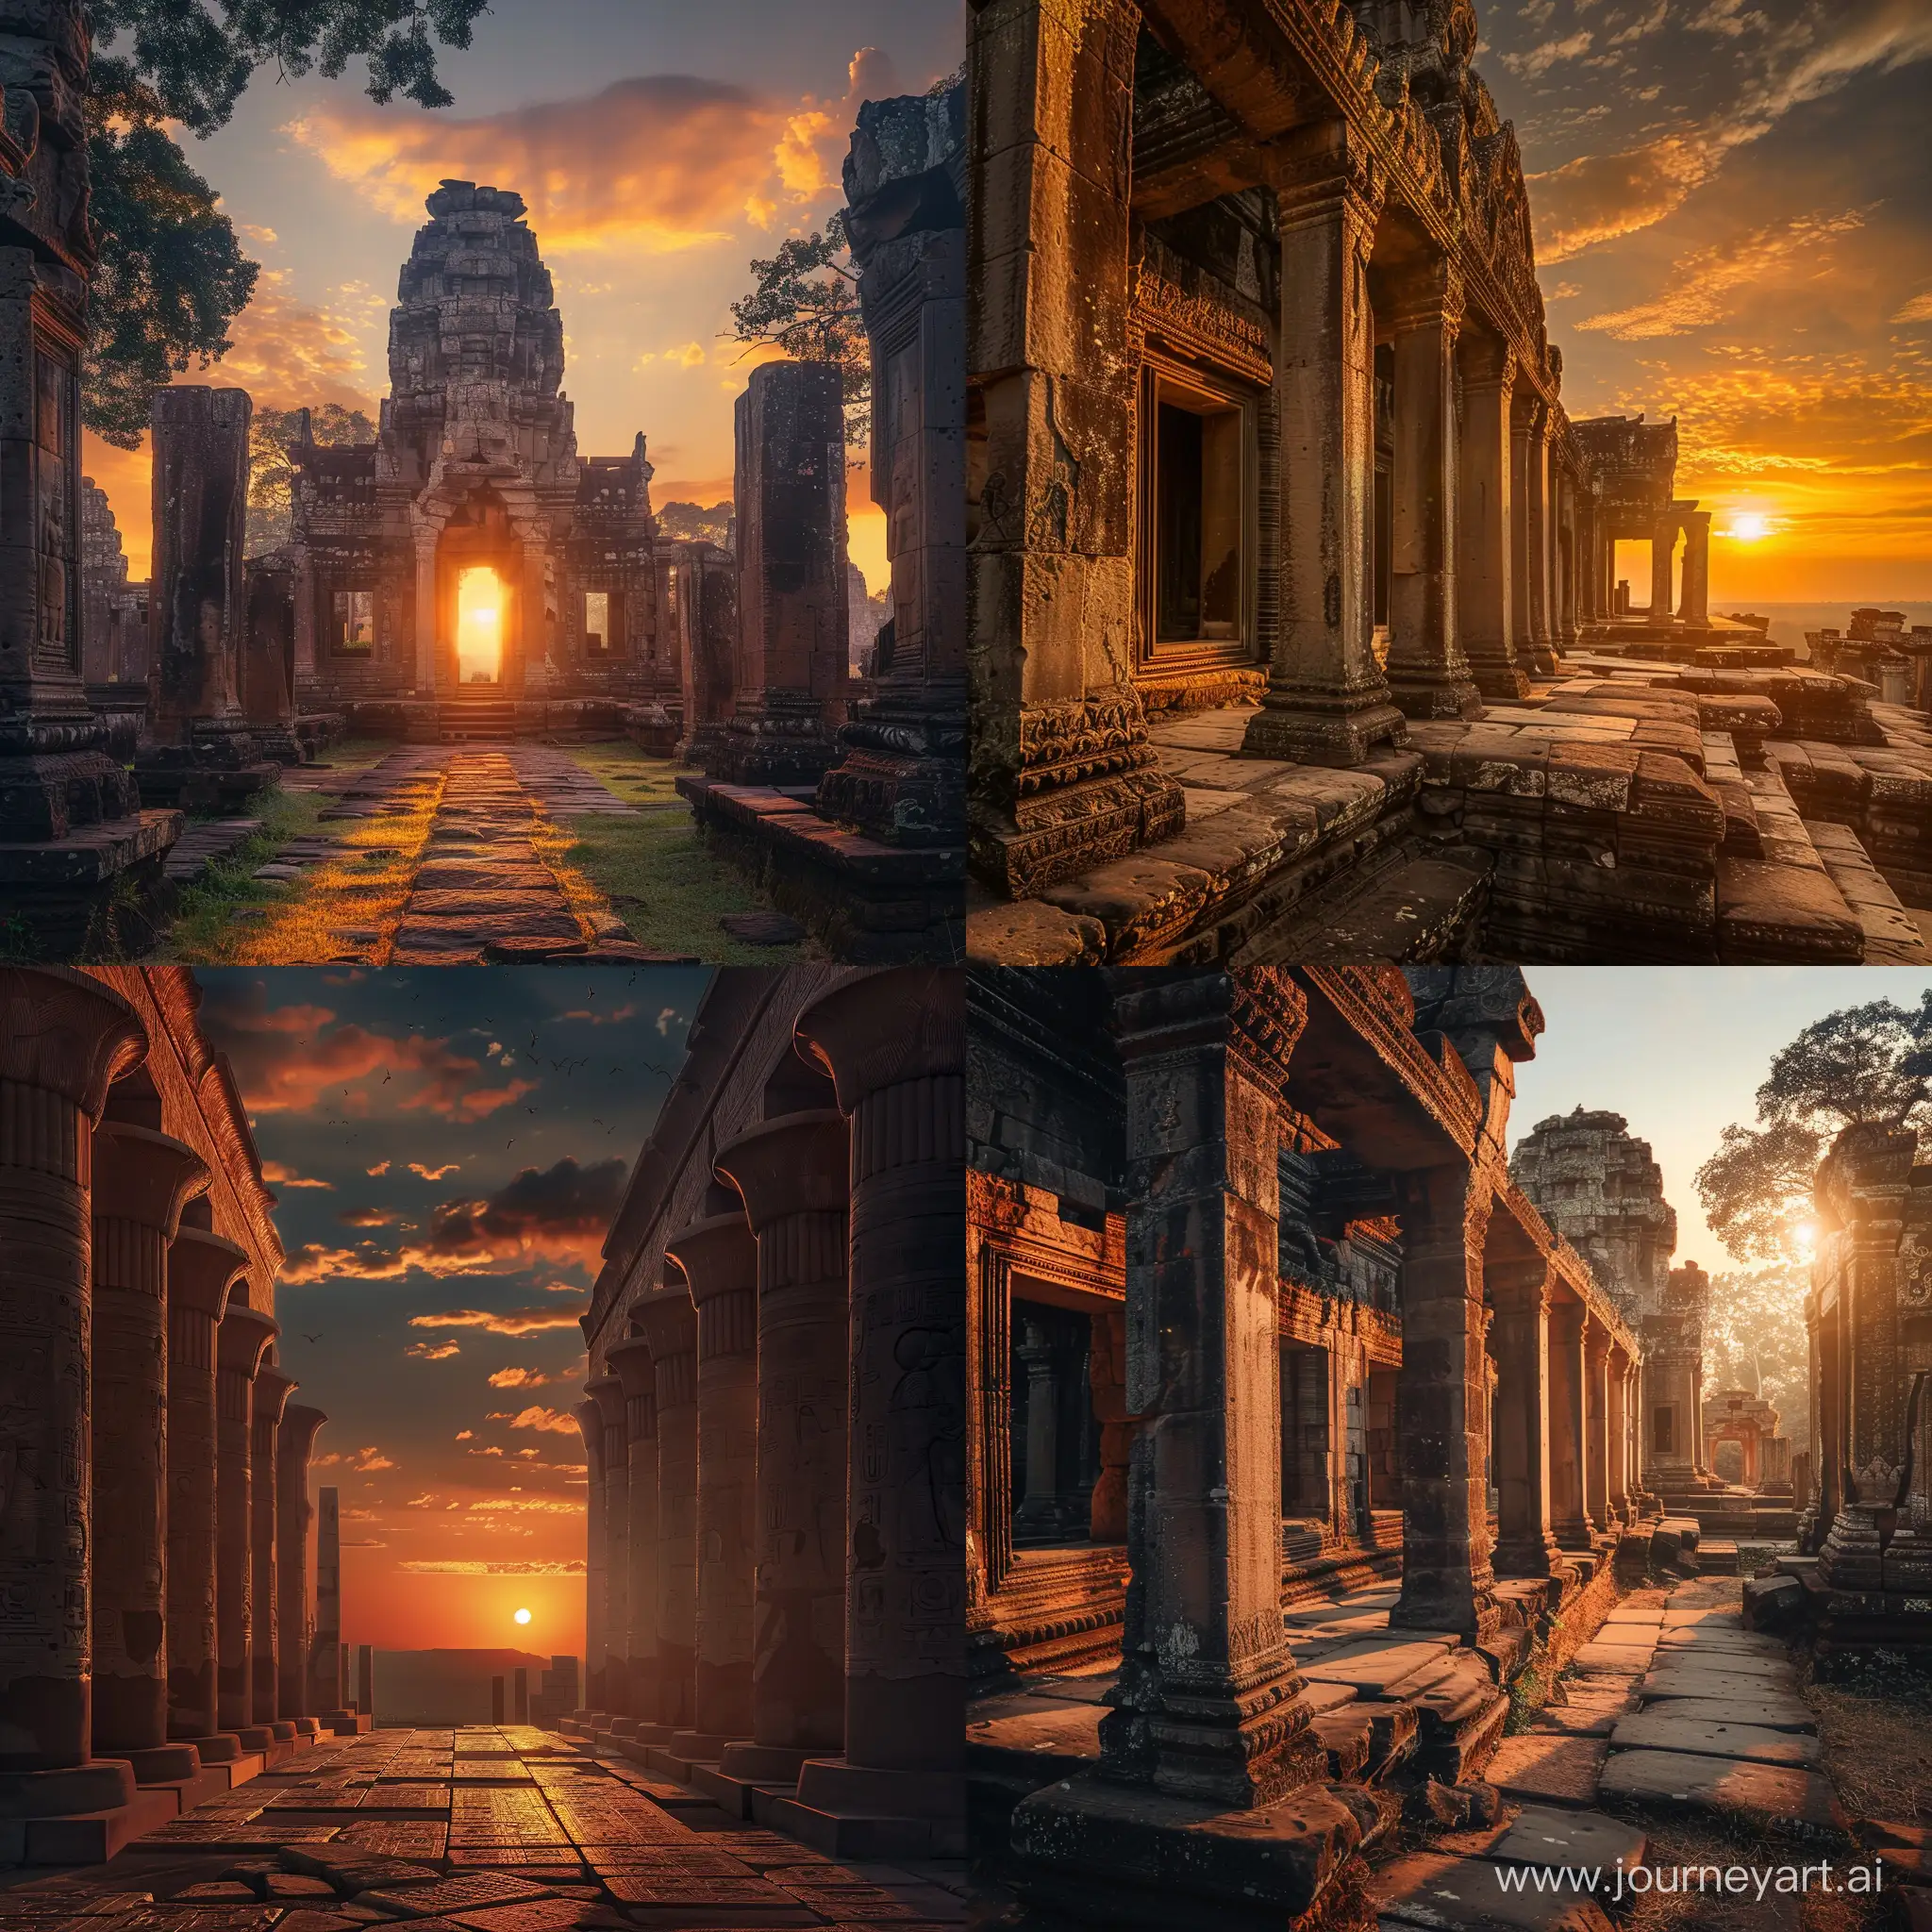 the ancient temple in sunrise